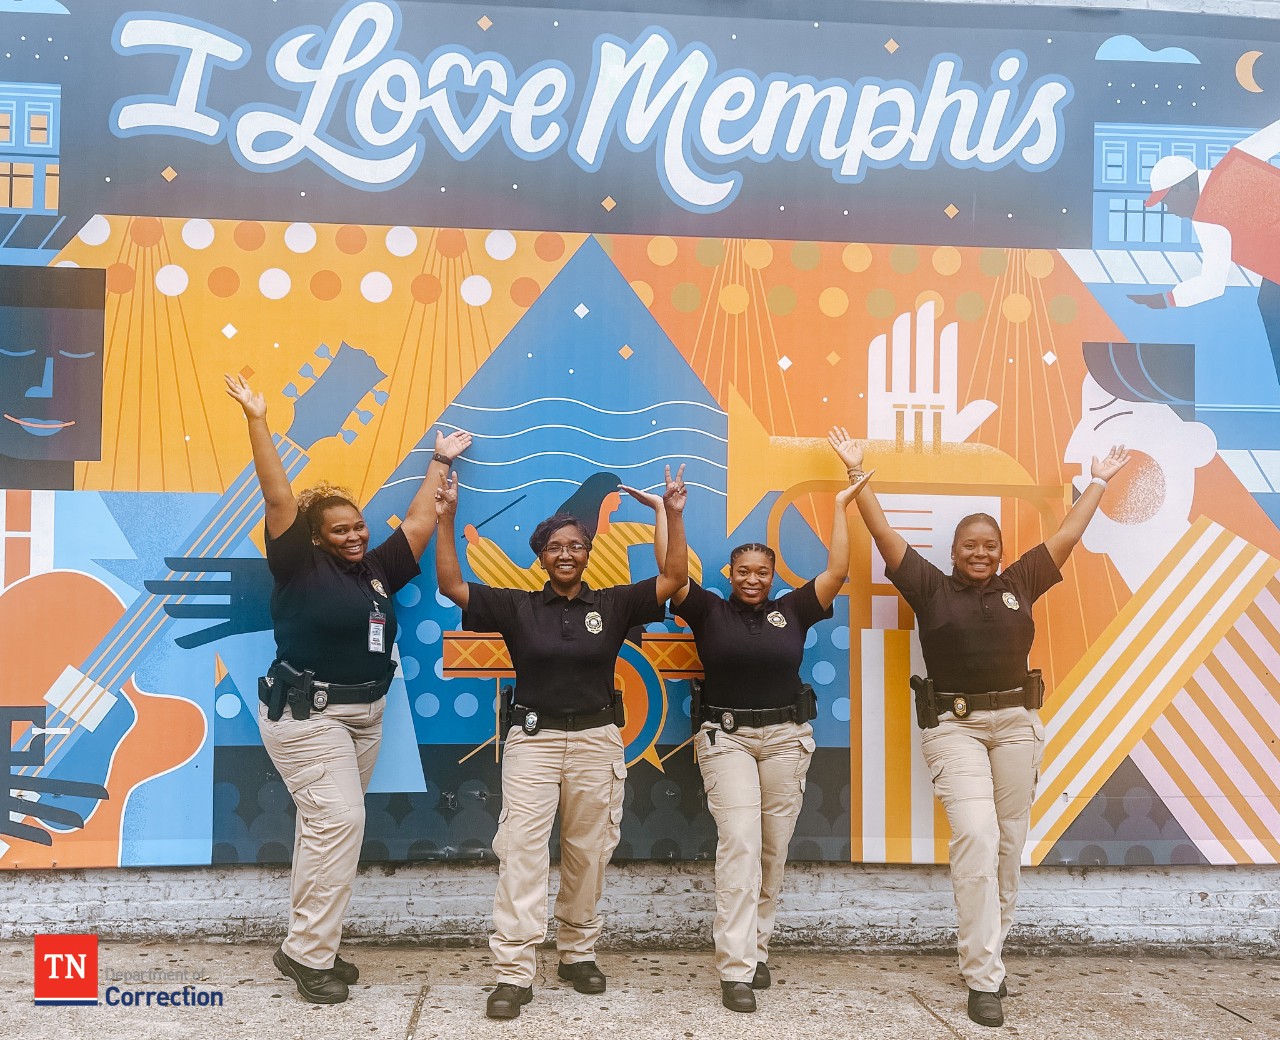 Photo of probation parole officers with Memphis mural